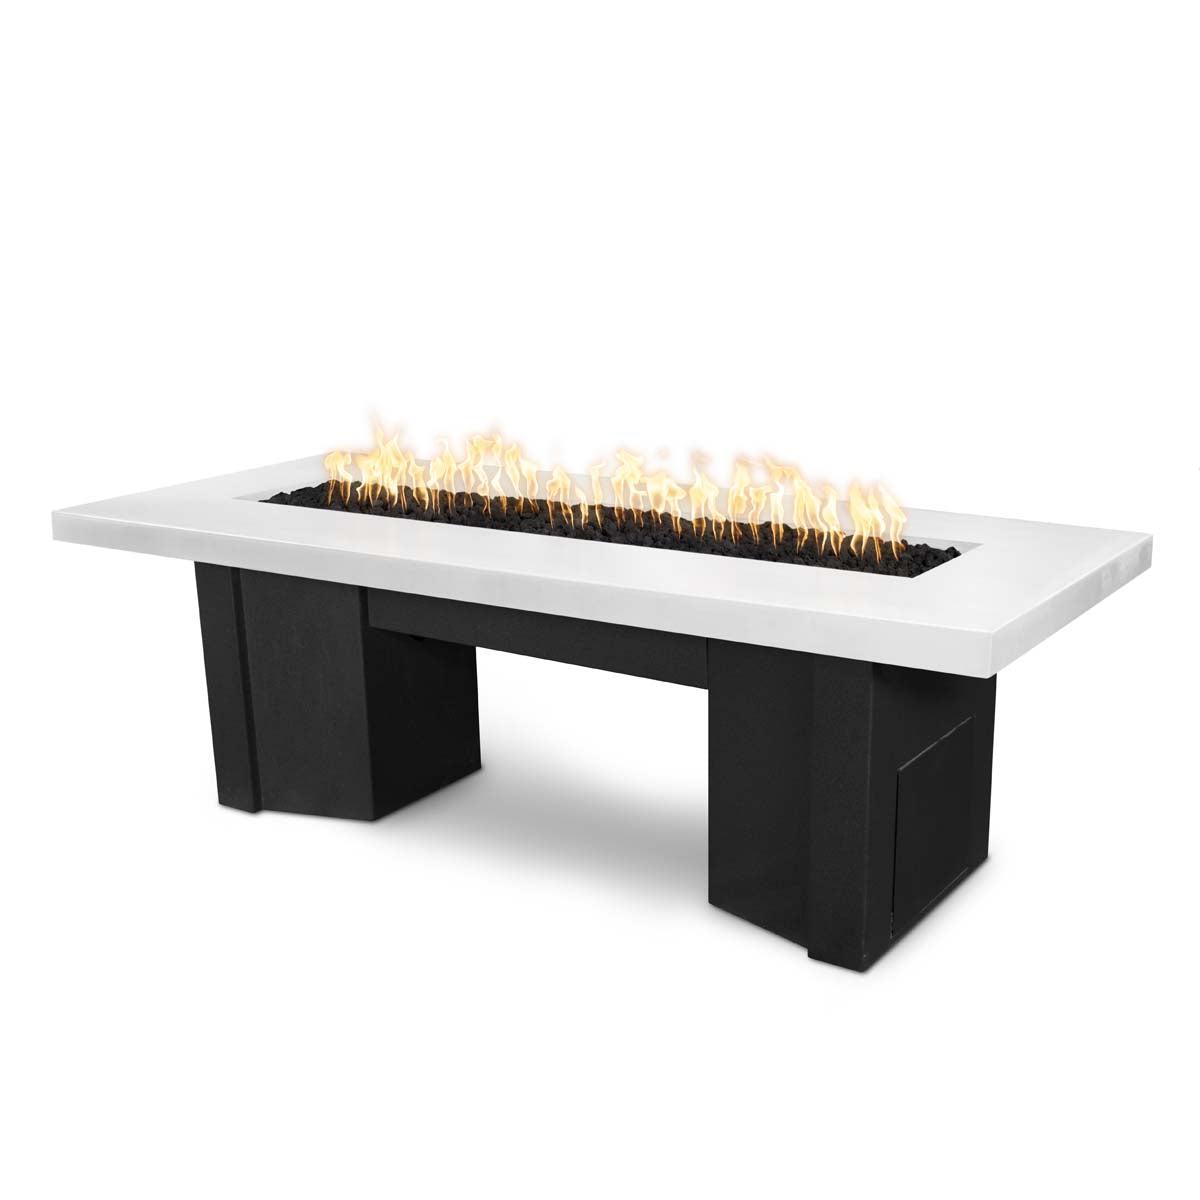 The Outdoor Plus Rectangular Alameda 60" Black & White Powder Coated Liquid Propane Fire Pit with 110V Electronic Ignition